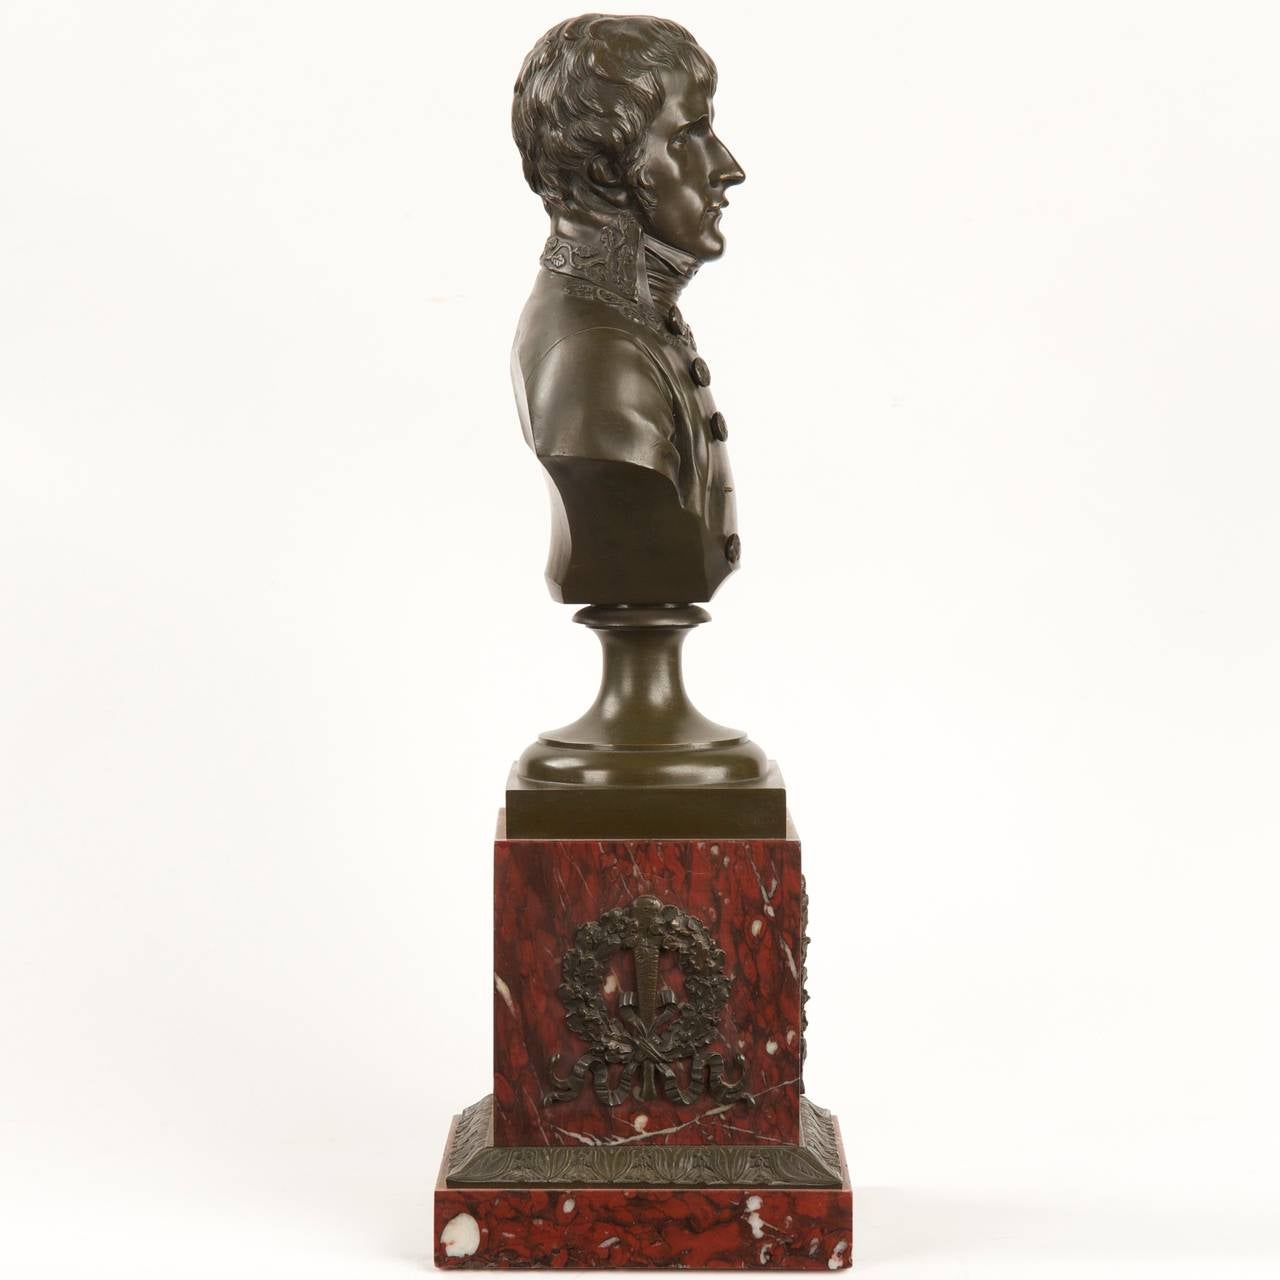 This is a very finely cast French School antique bronze sculpture depicting Napoleon as First Consul.  It is very finely detailed, the surface of the bronze filed and chased impeccably.  The moment captures Napoleon as a young man, depicted with a